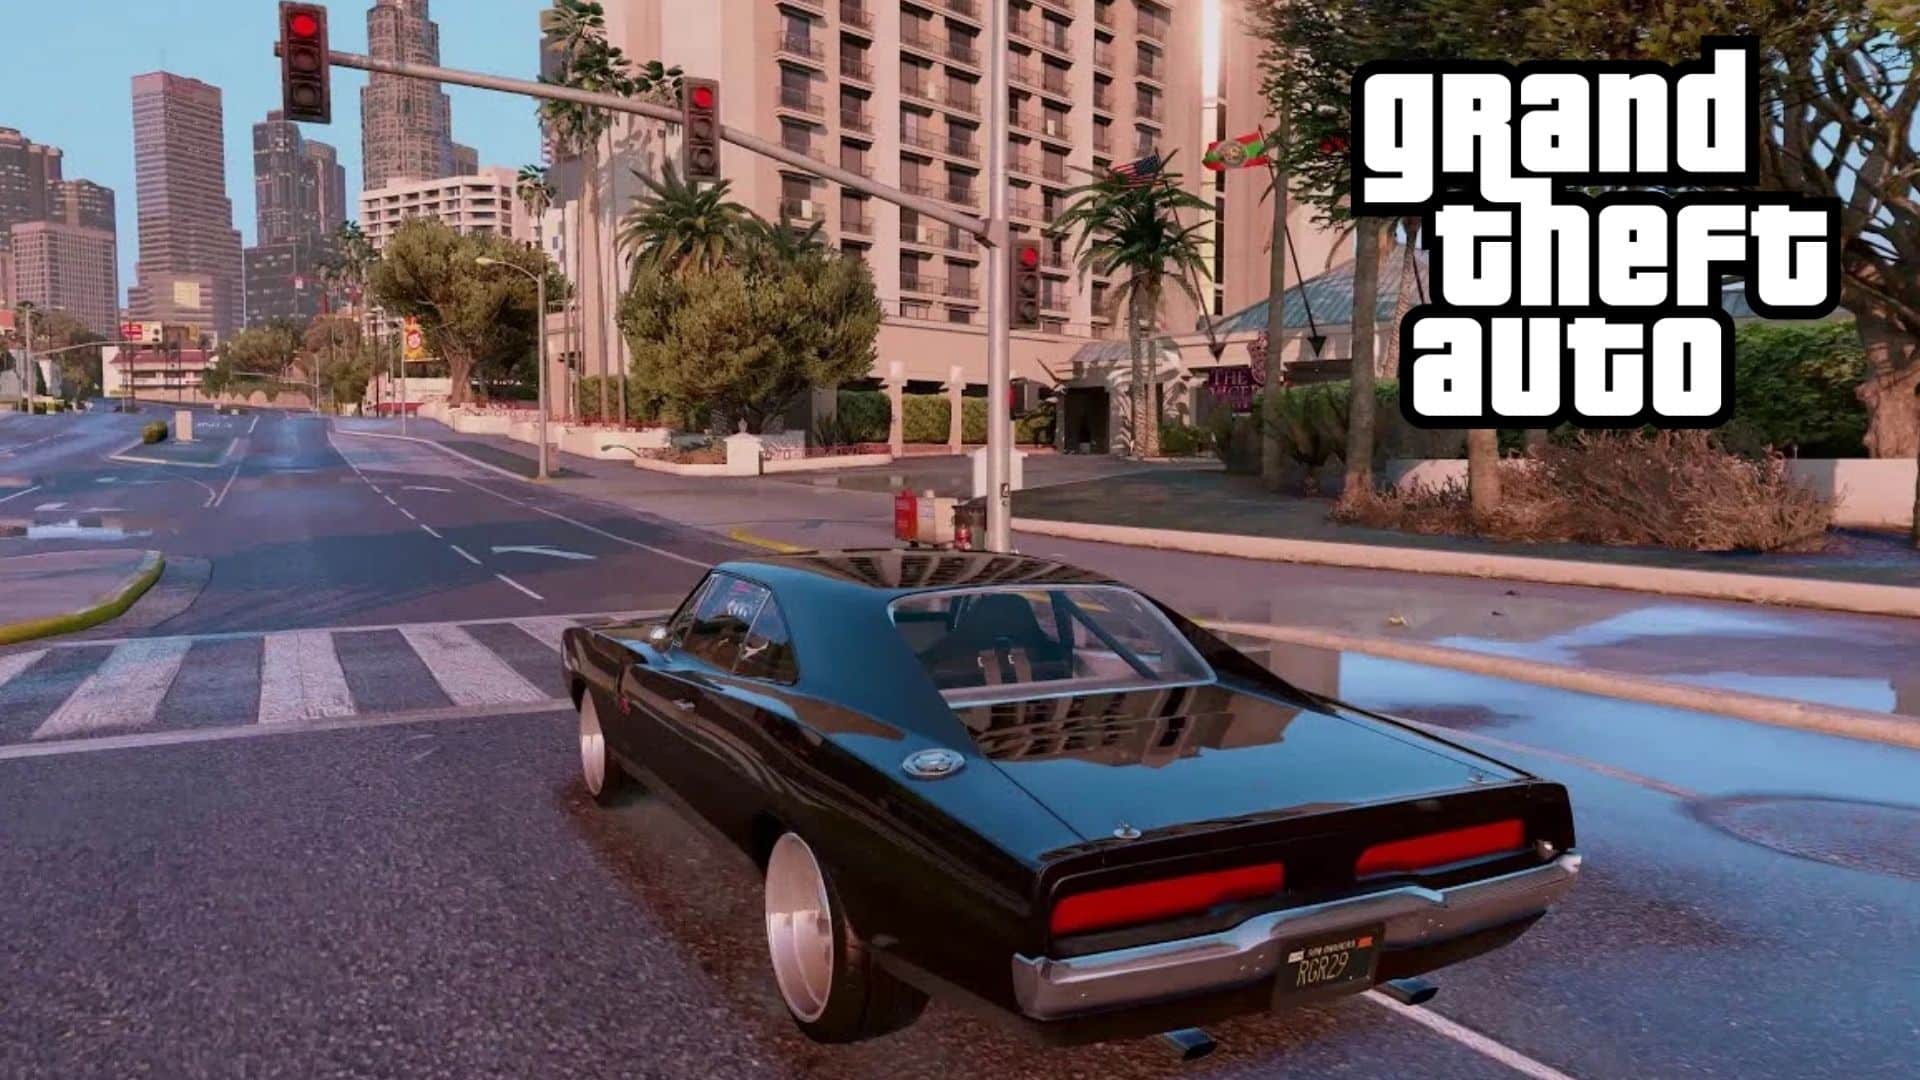 GTA 6 Leaks: Grand Theft Auto 6 Actors Revealed in Exciting New Report